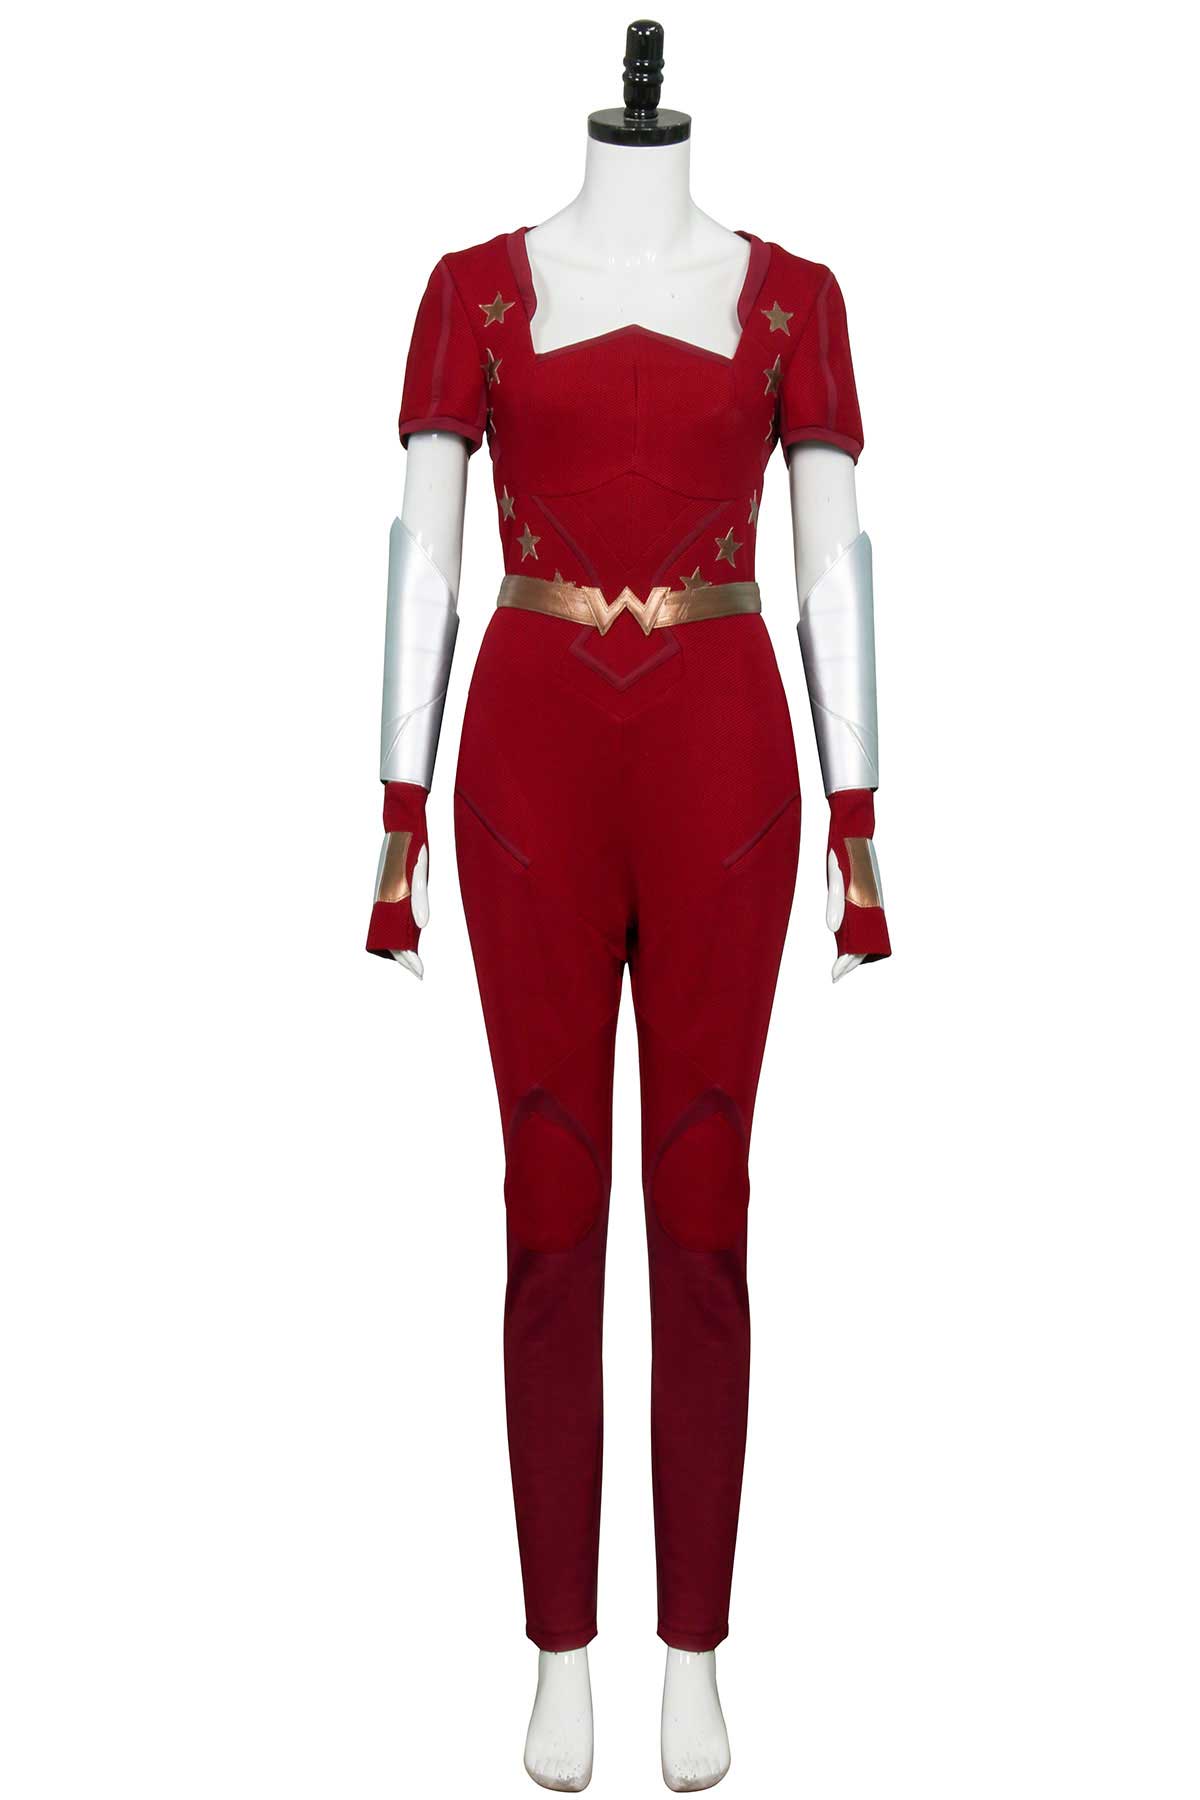 titanes temporada 2 DONNA TROY HALLOWEEN COSPLAY COSPLAY DESMPSUIT UNIFUG Outfit